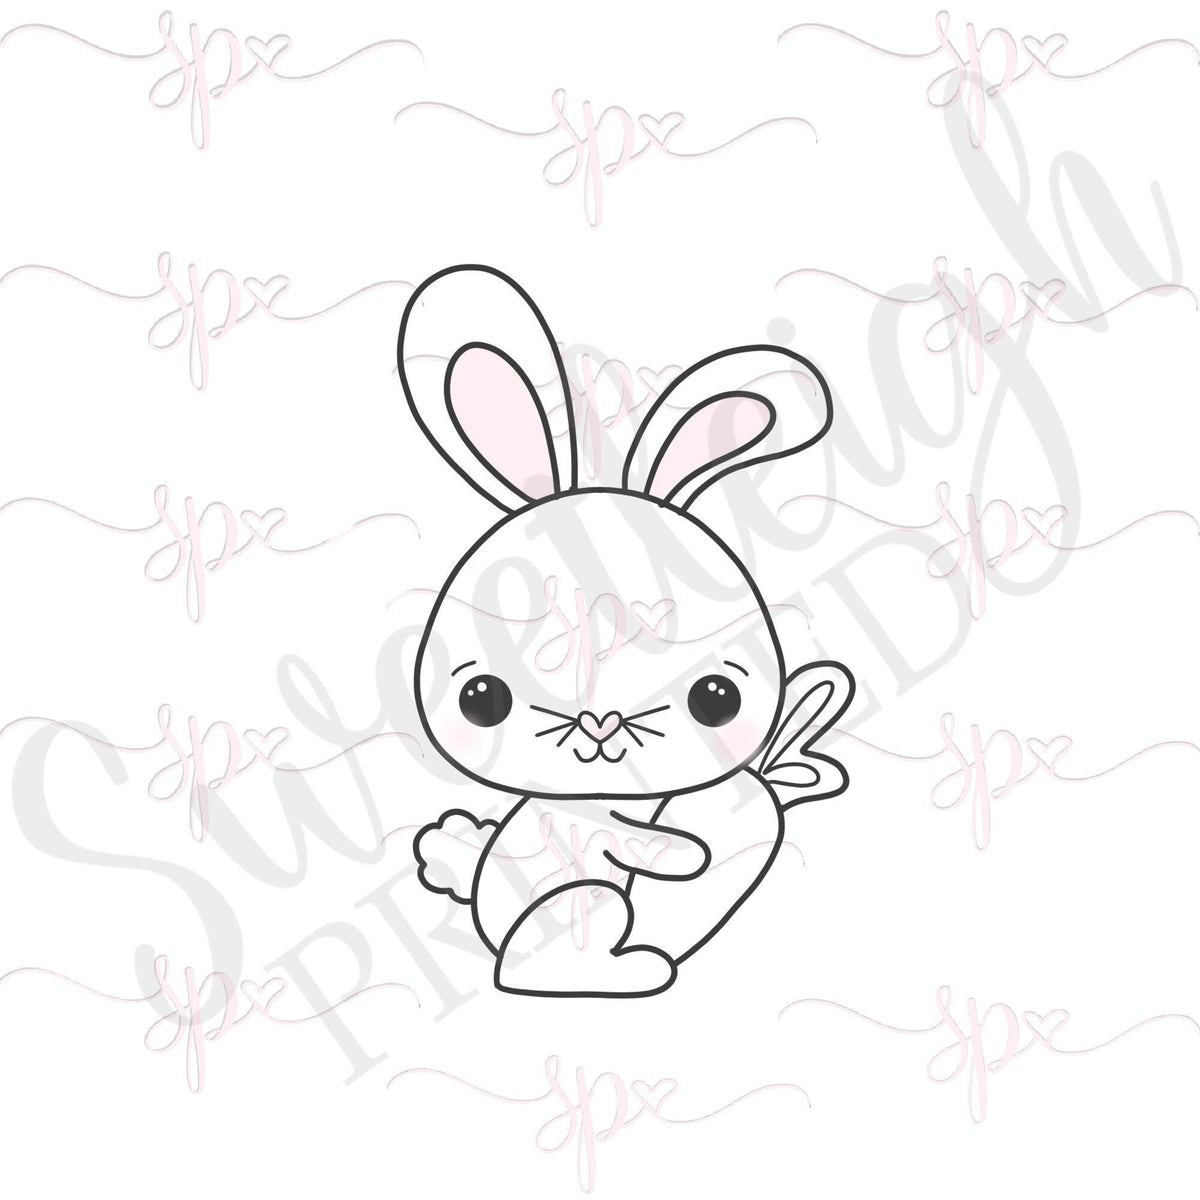 Bunny with Carrot Cookie Cutter - Sweetleigh 